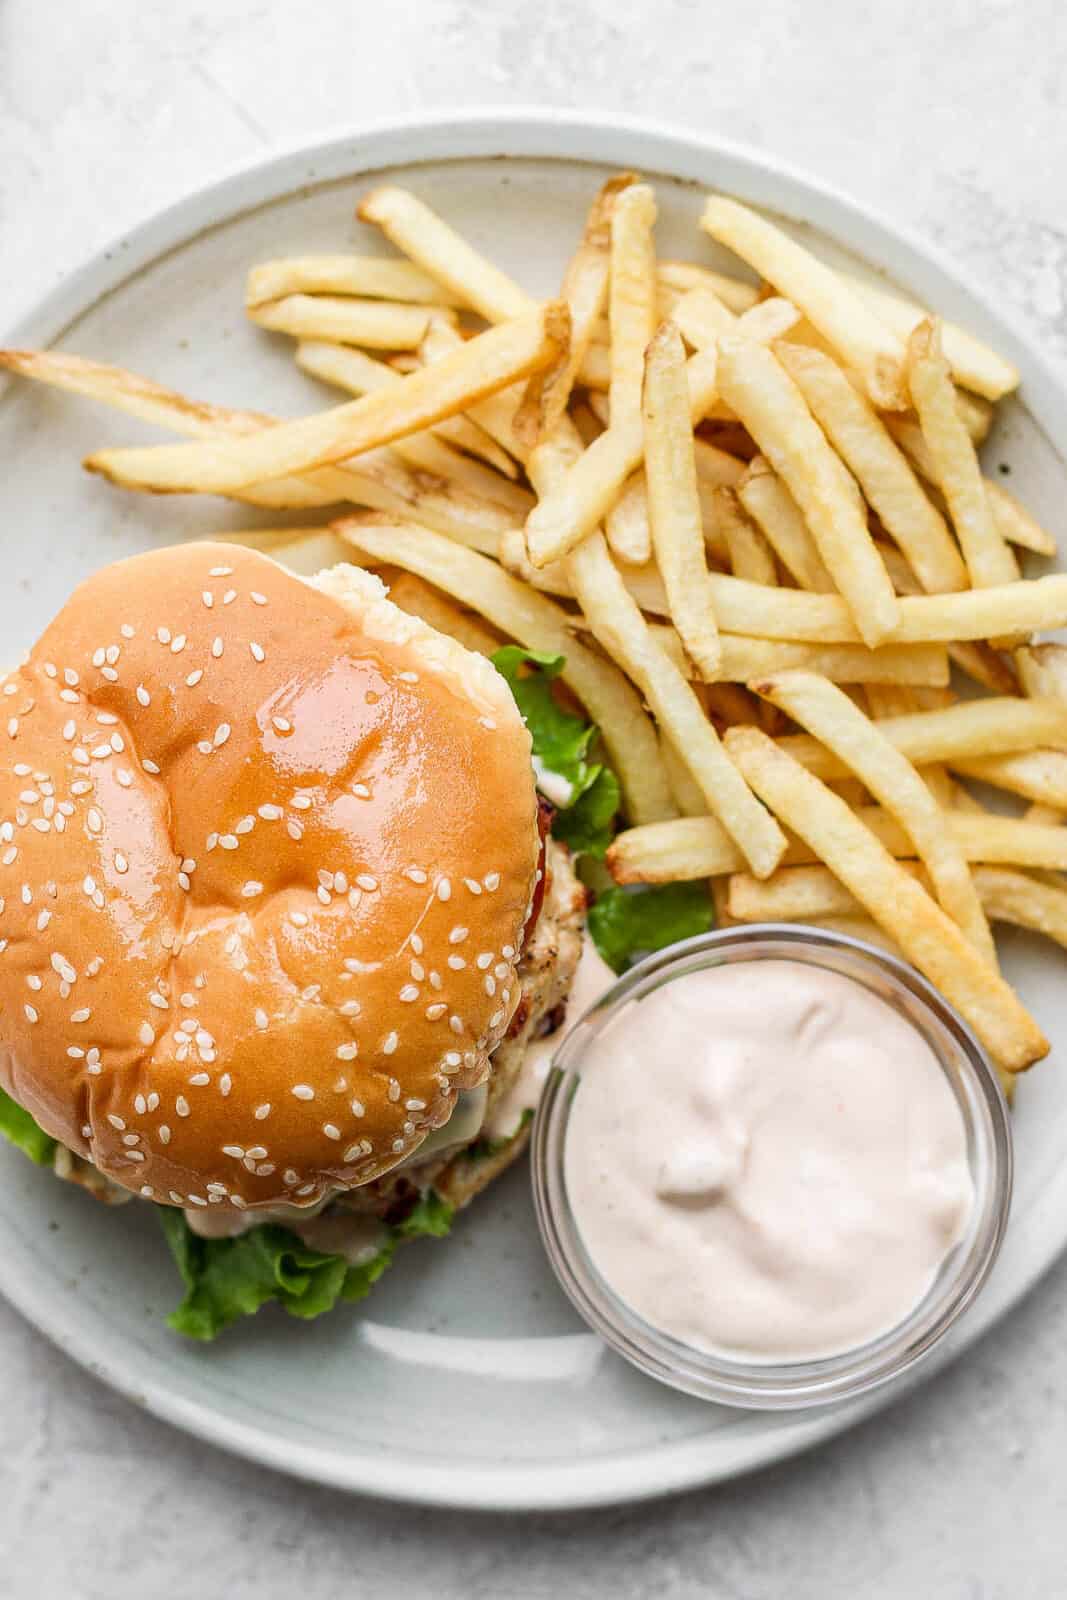 A chicken burger on a plate with french fries and a side of burger sauce.